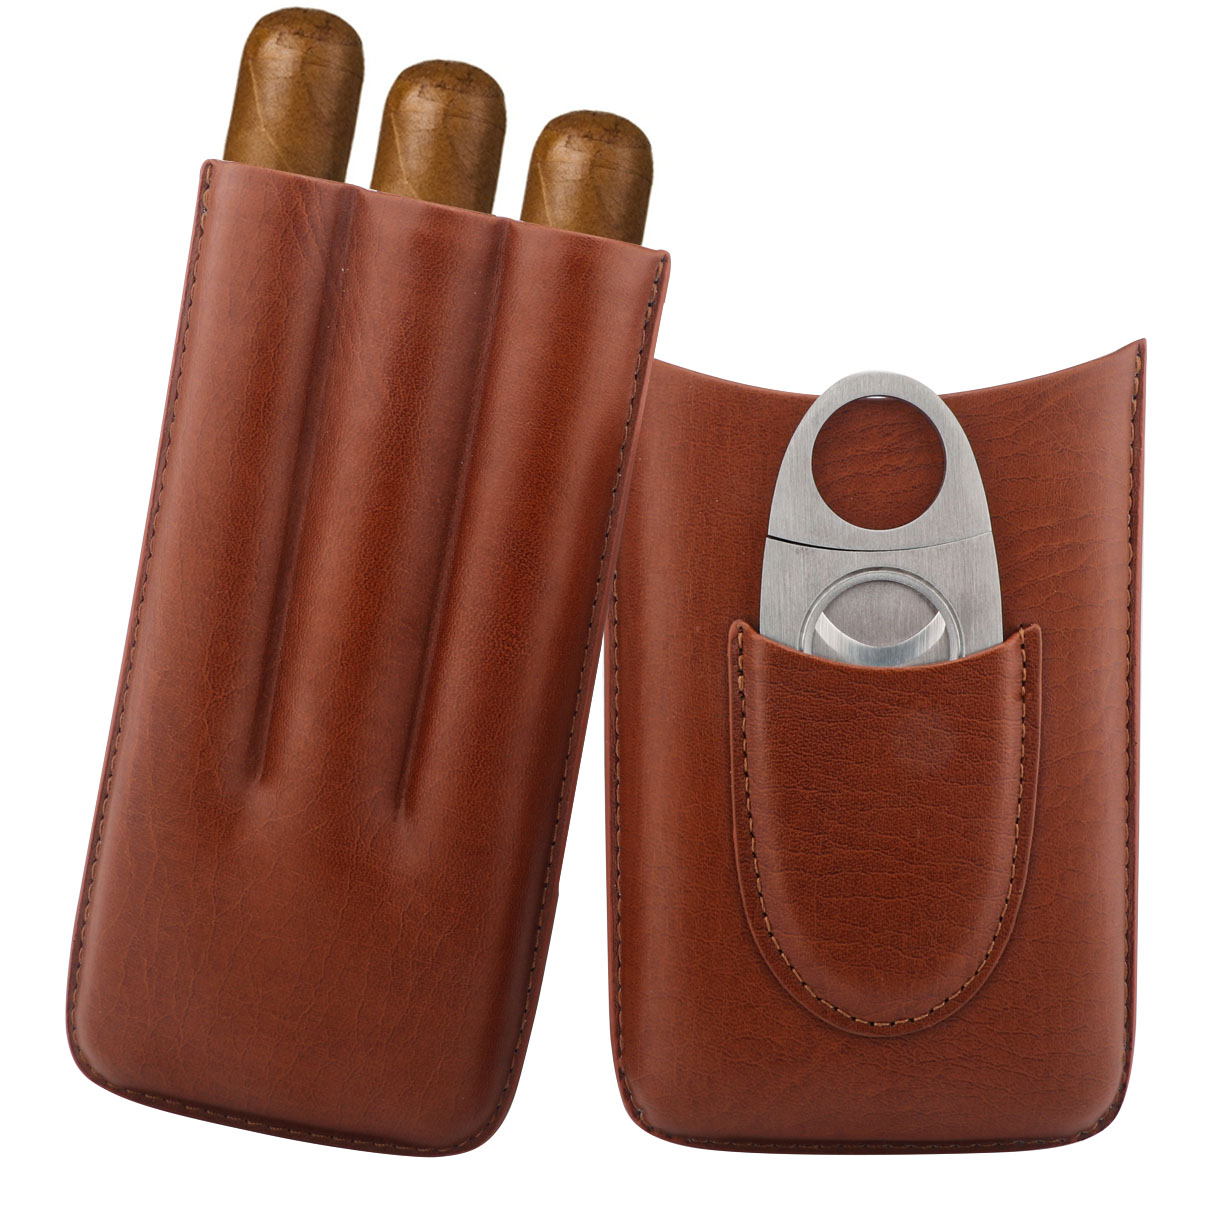 Cow Leather Cigar Case Portable Travel Cigar Humidor 3 Colors